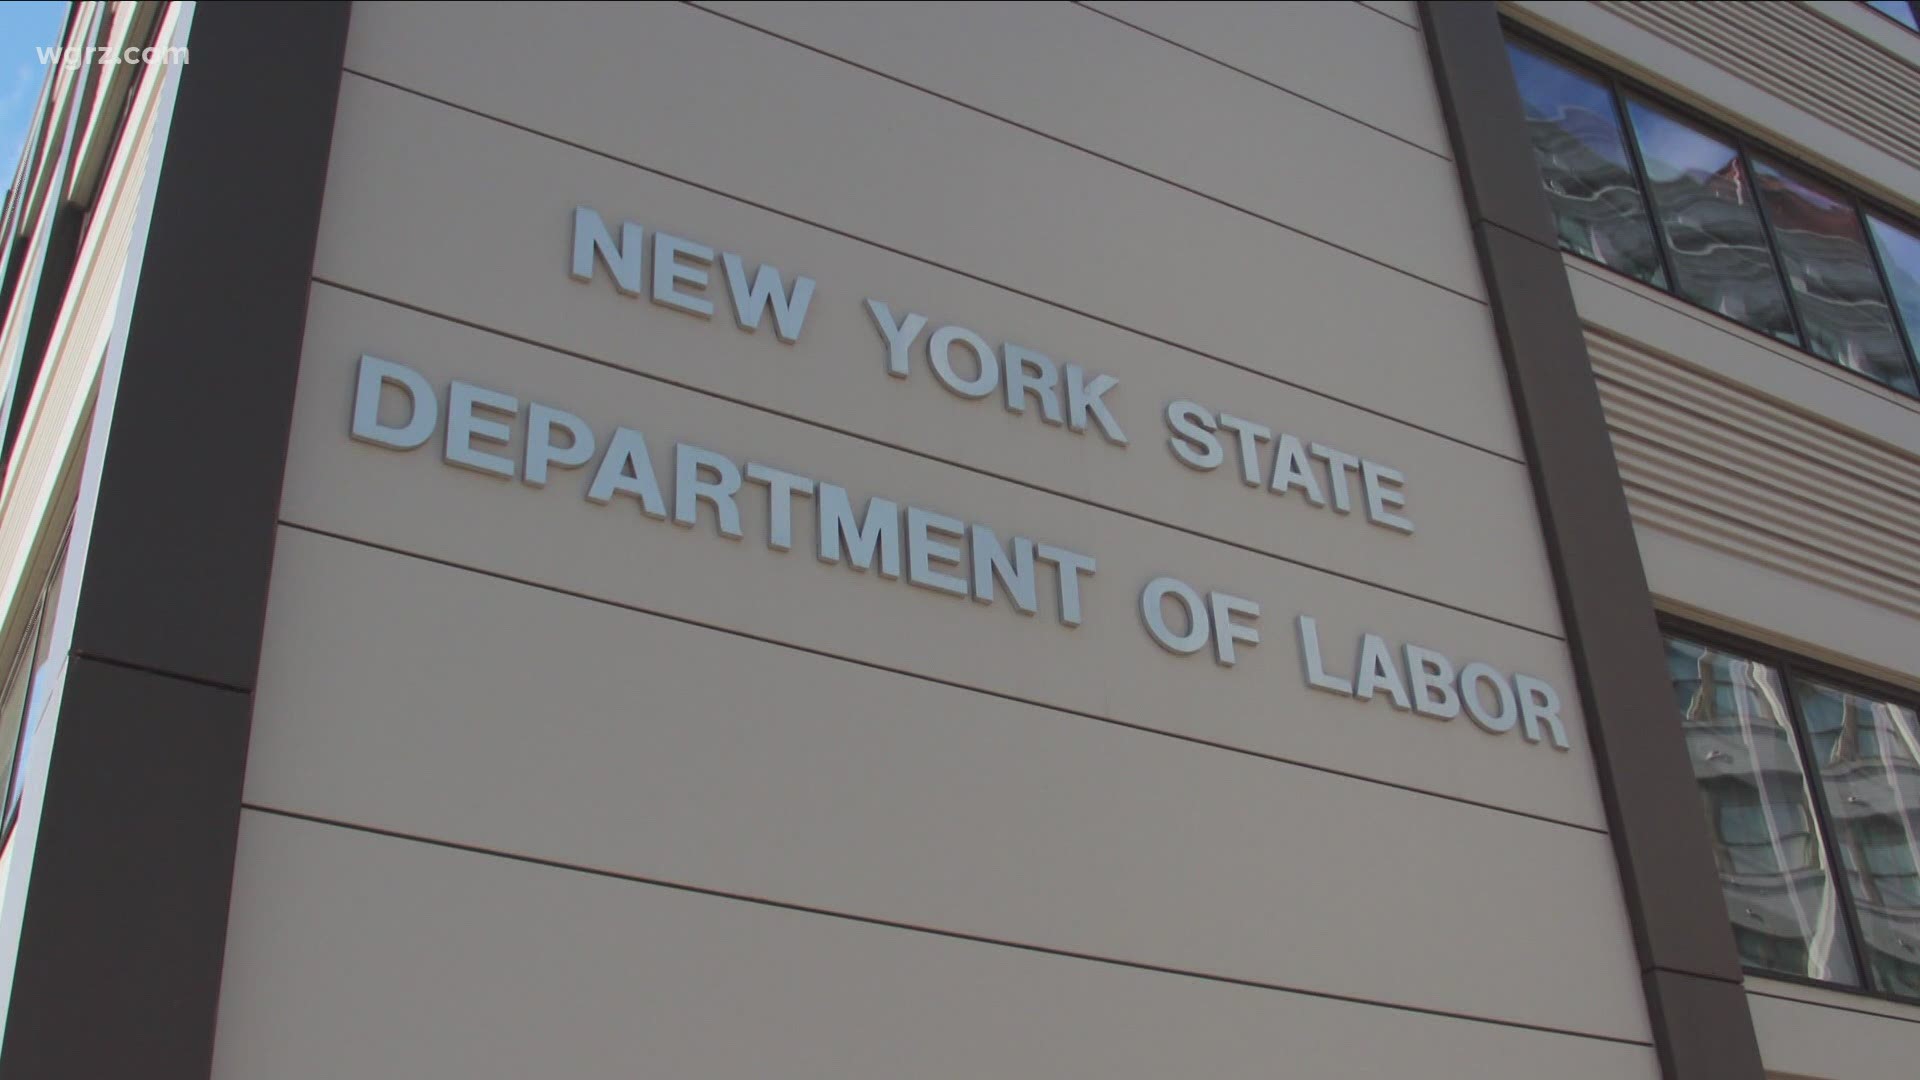 NYSDOL: refunds have started going out